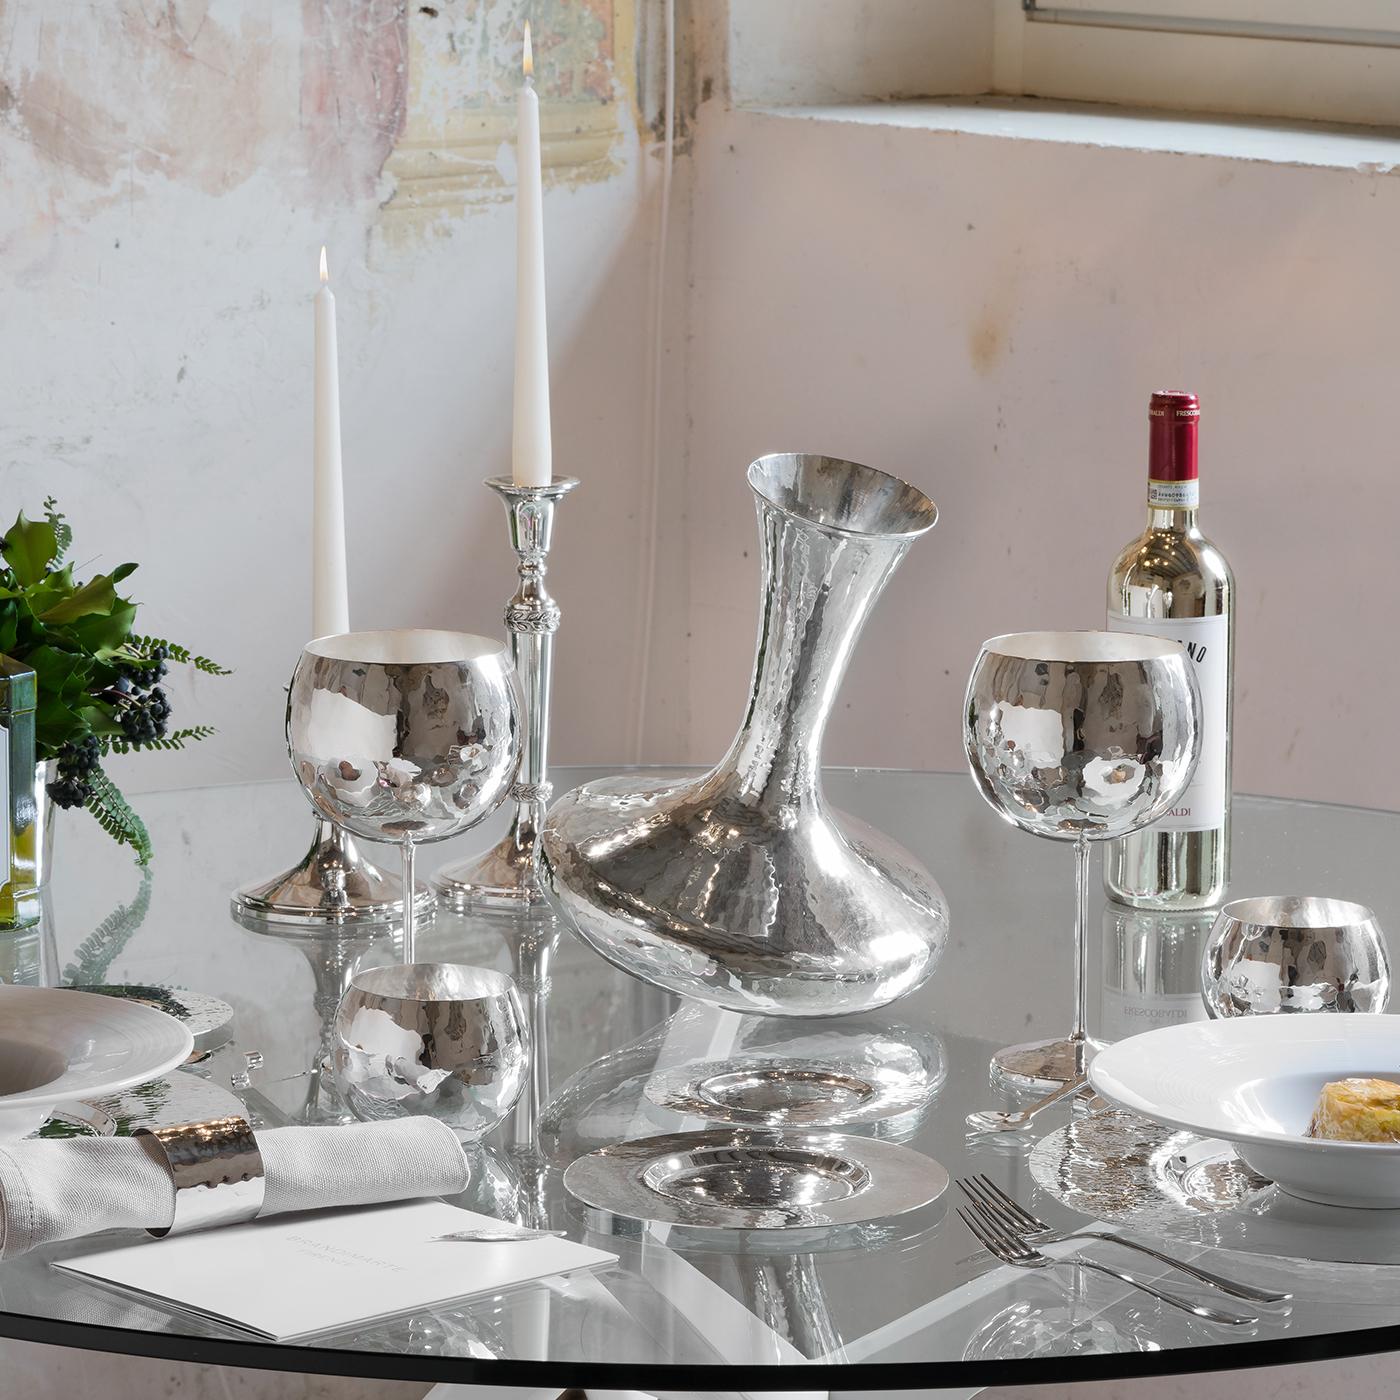 This large decanter's unique shape resembles a spinning top. It was designed to elevate liquor's bouquet and flavor. Made from silver, it is the perfect storage container due to the material's antibacterial and antimicrobial properties. Its design